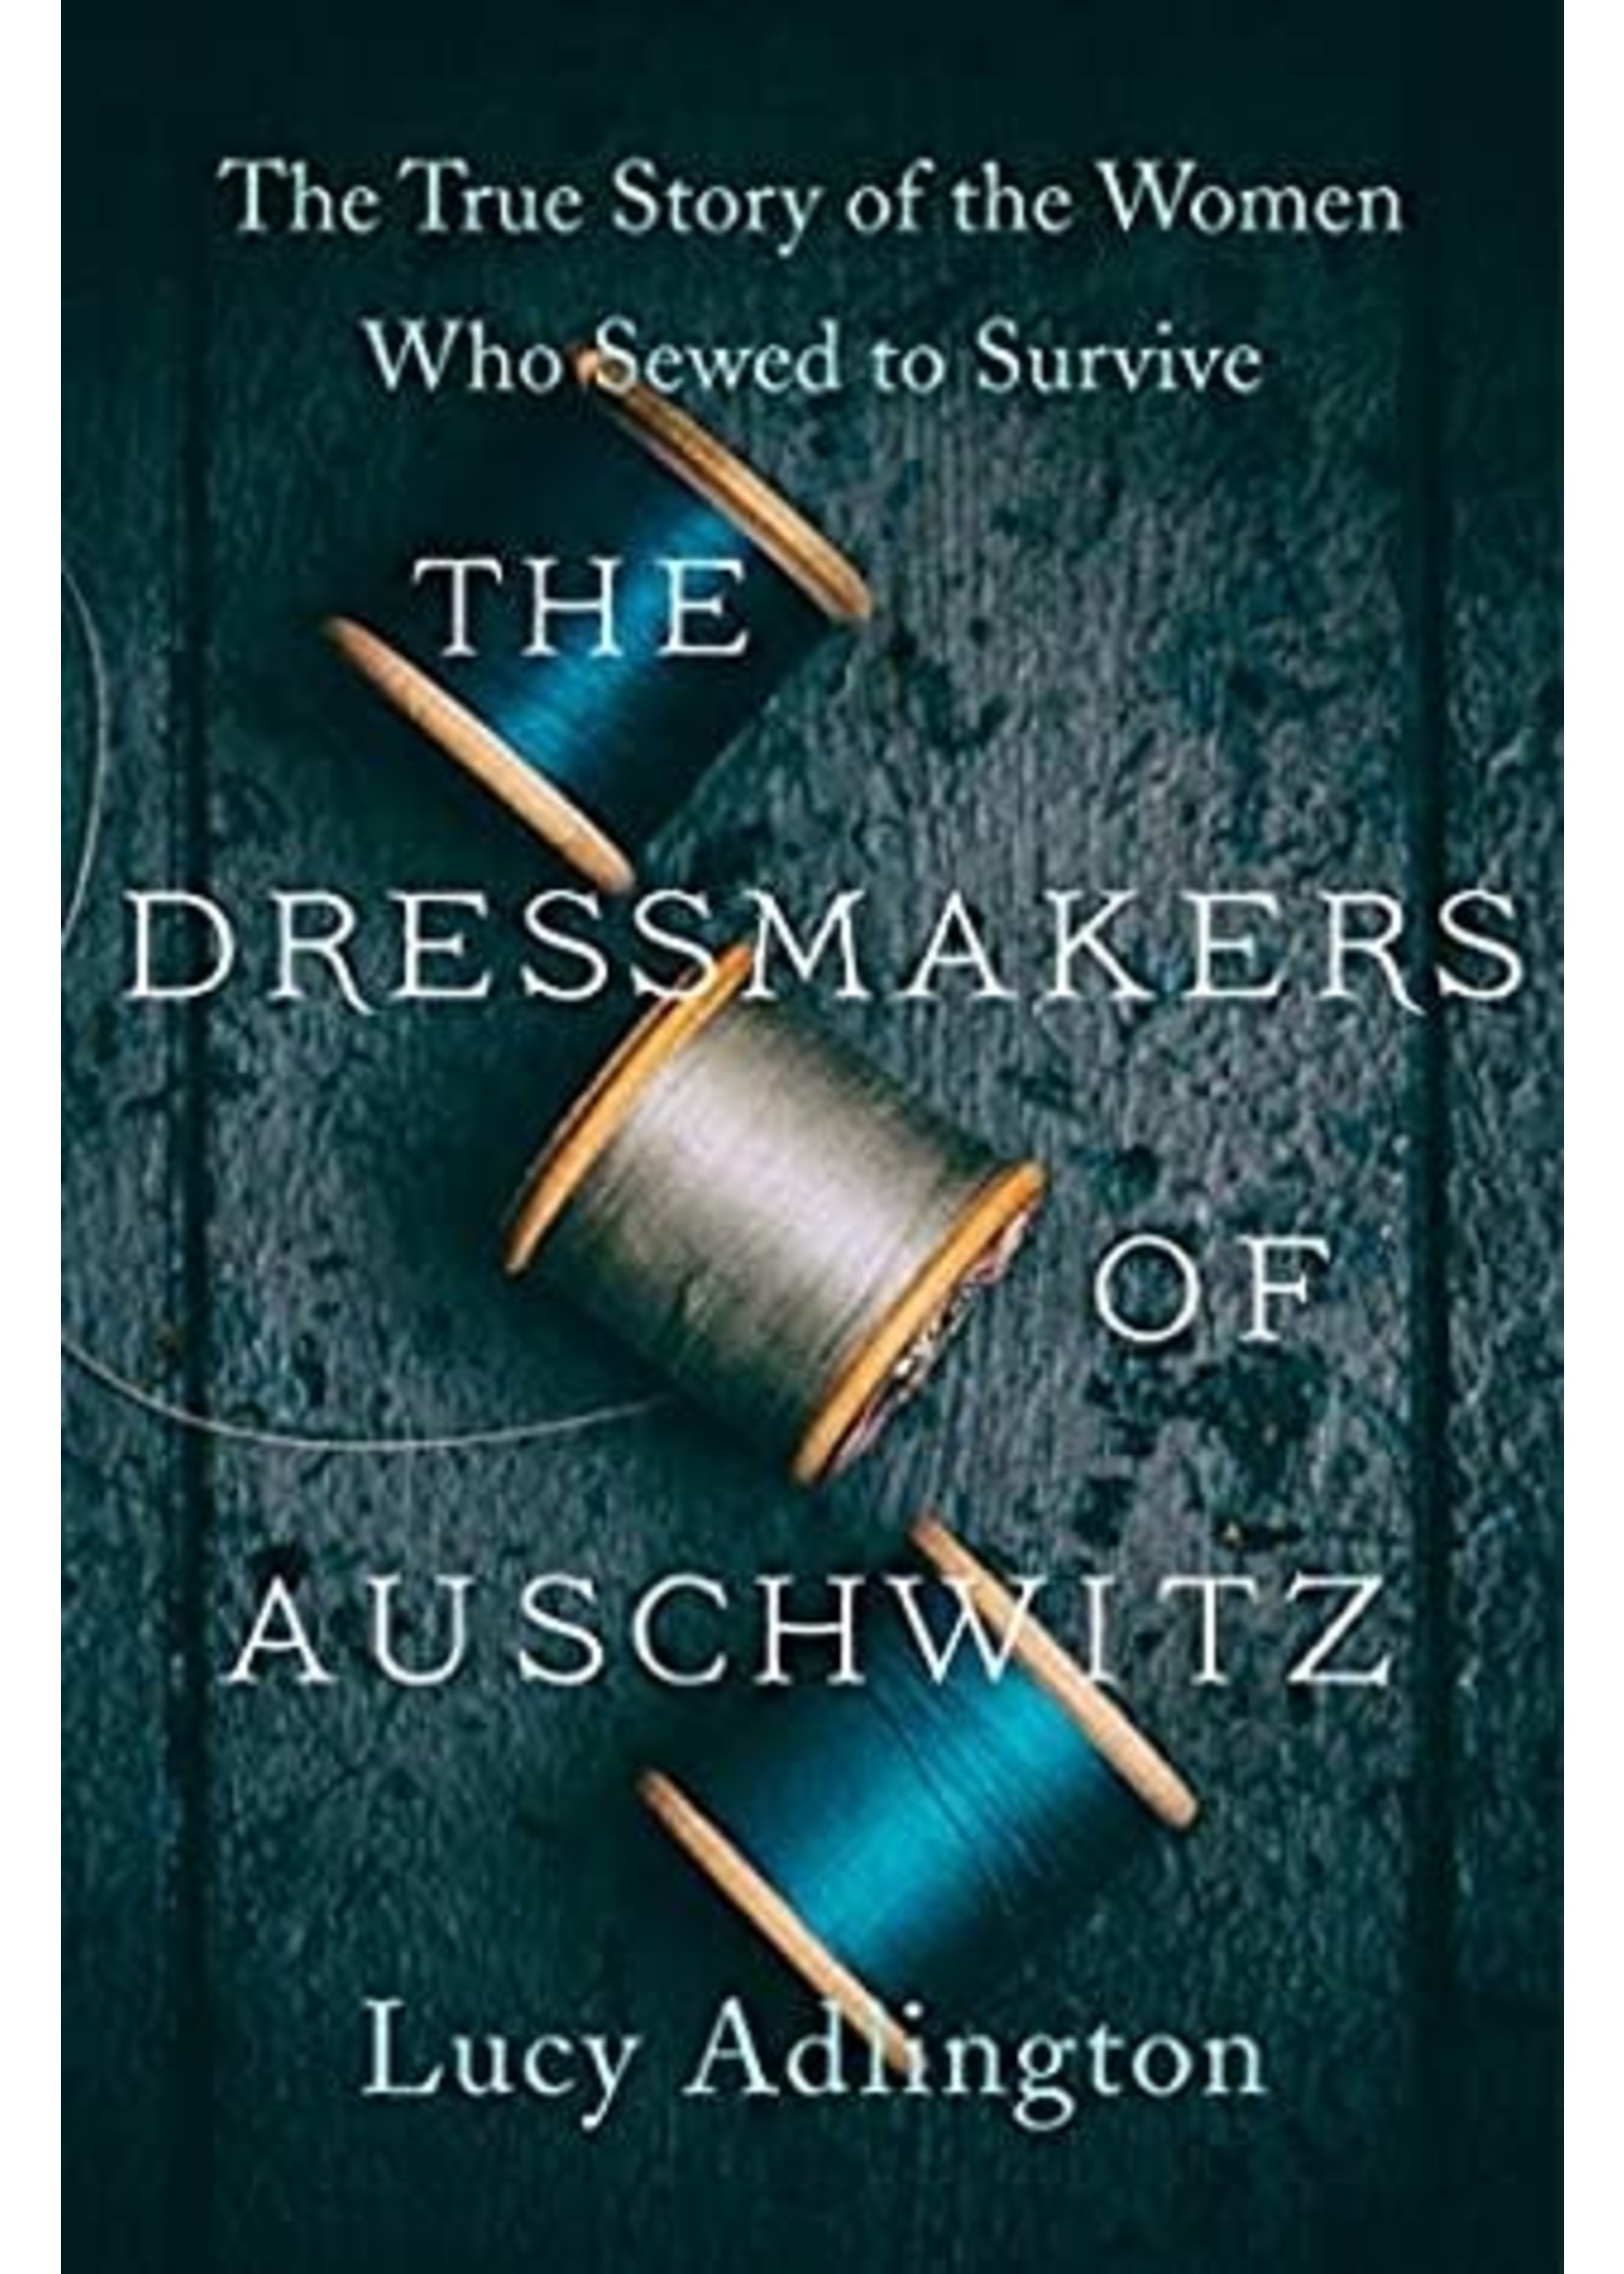 The Dressmakers of Auschwitz: The True Story of the Women Who Sewed to Survive by Lucy Adlington